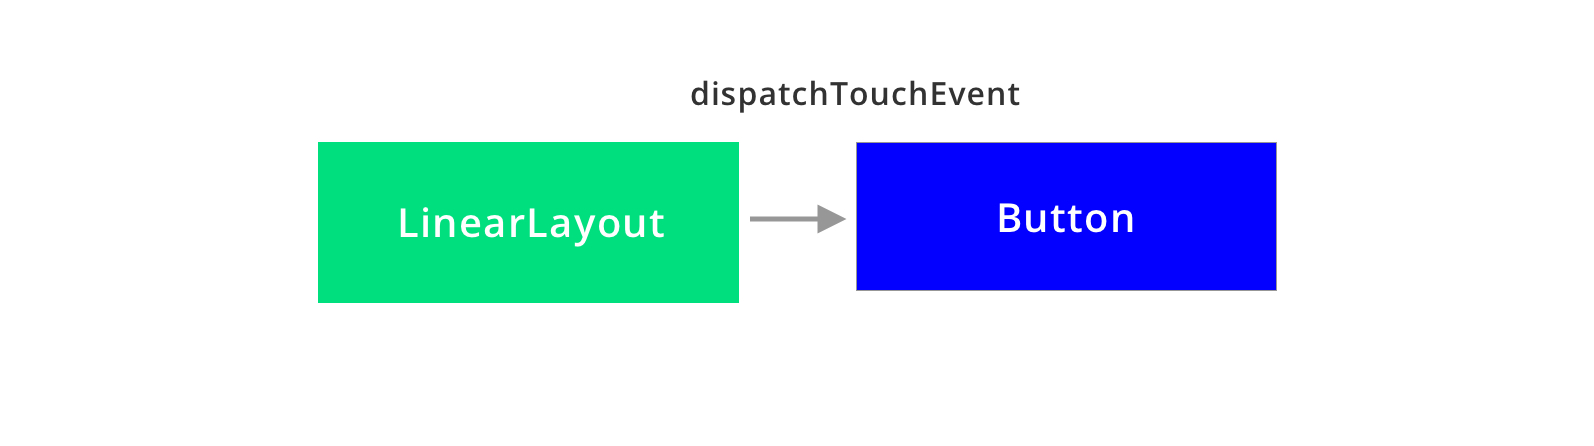 Understanding Touch Control and Events in Android